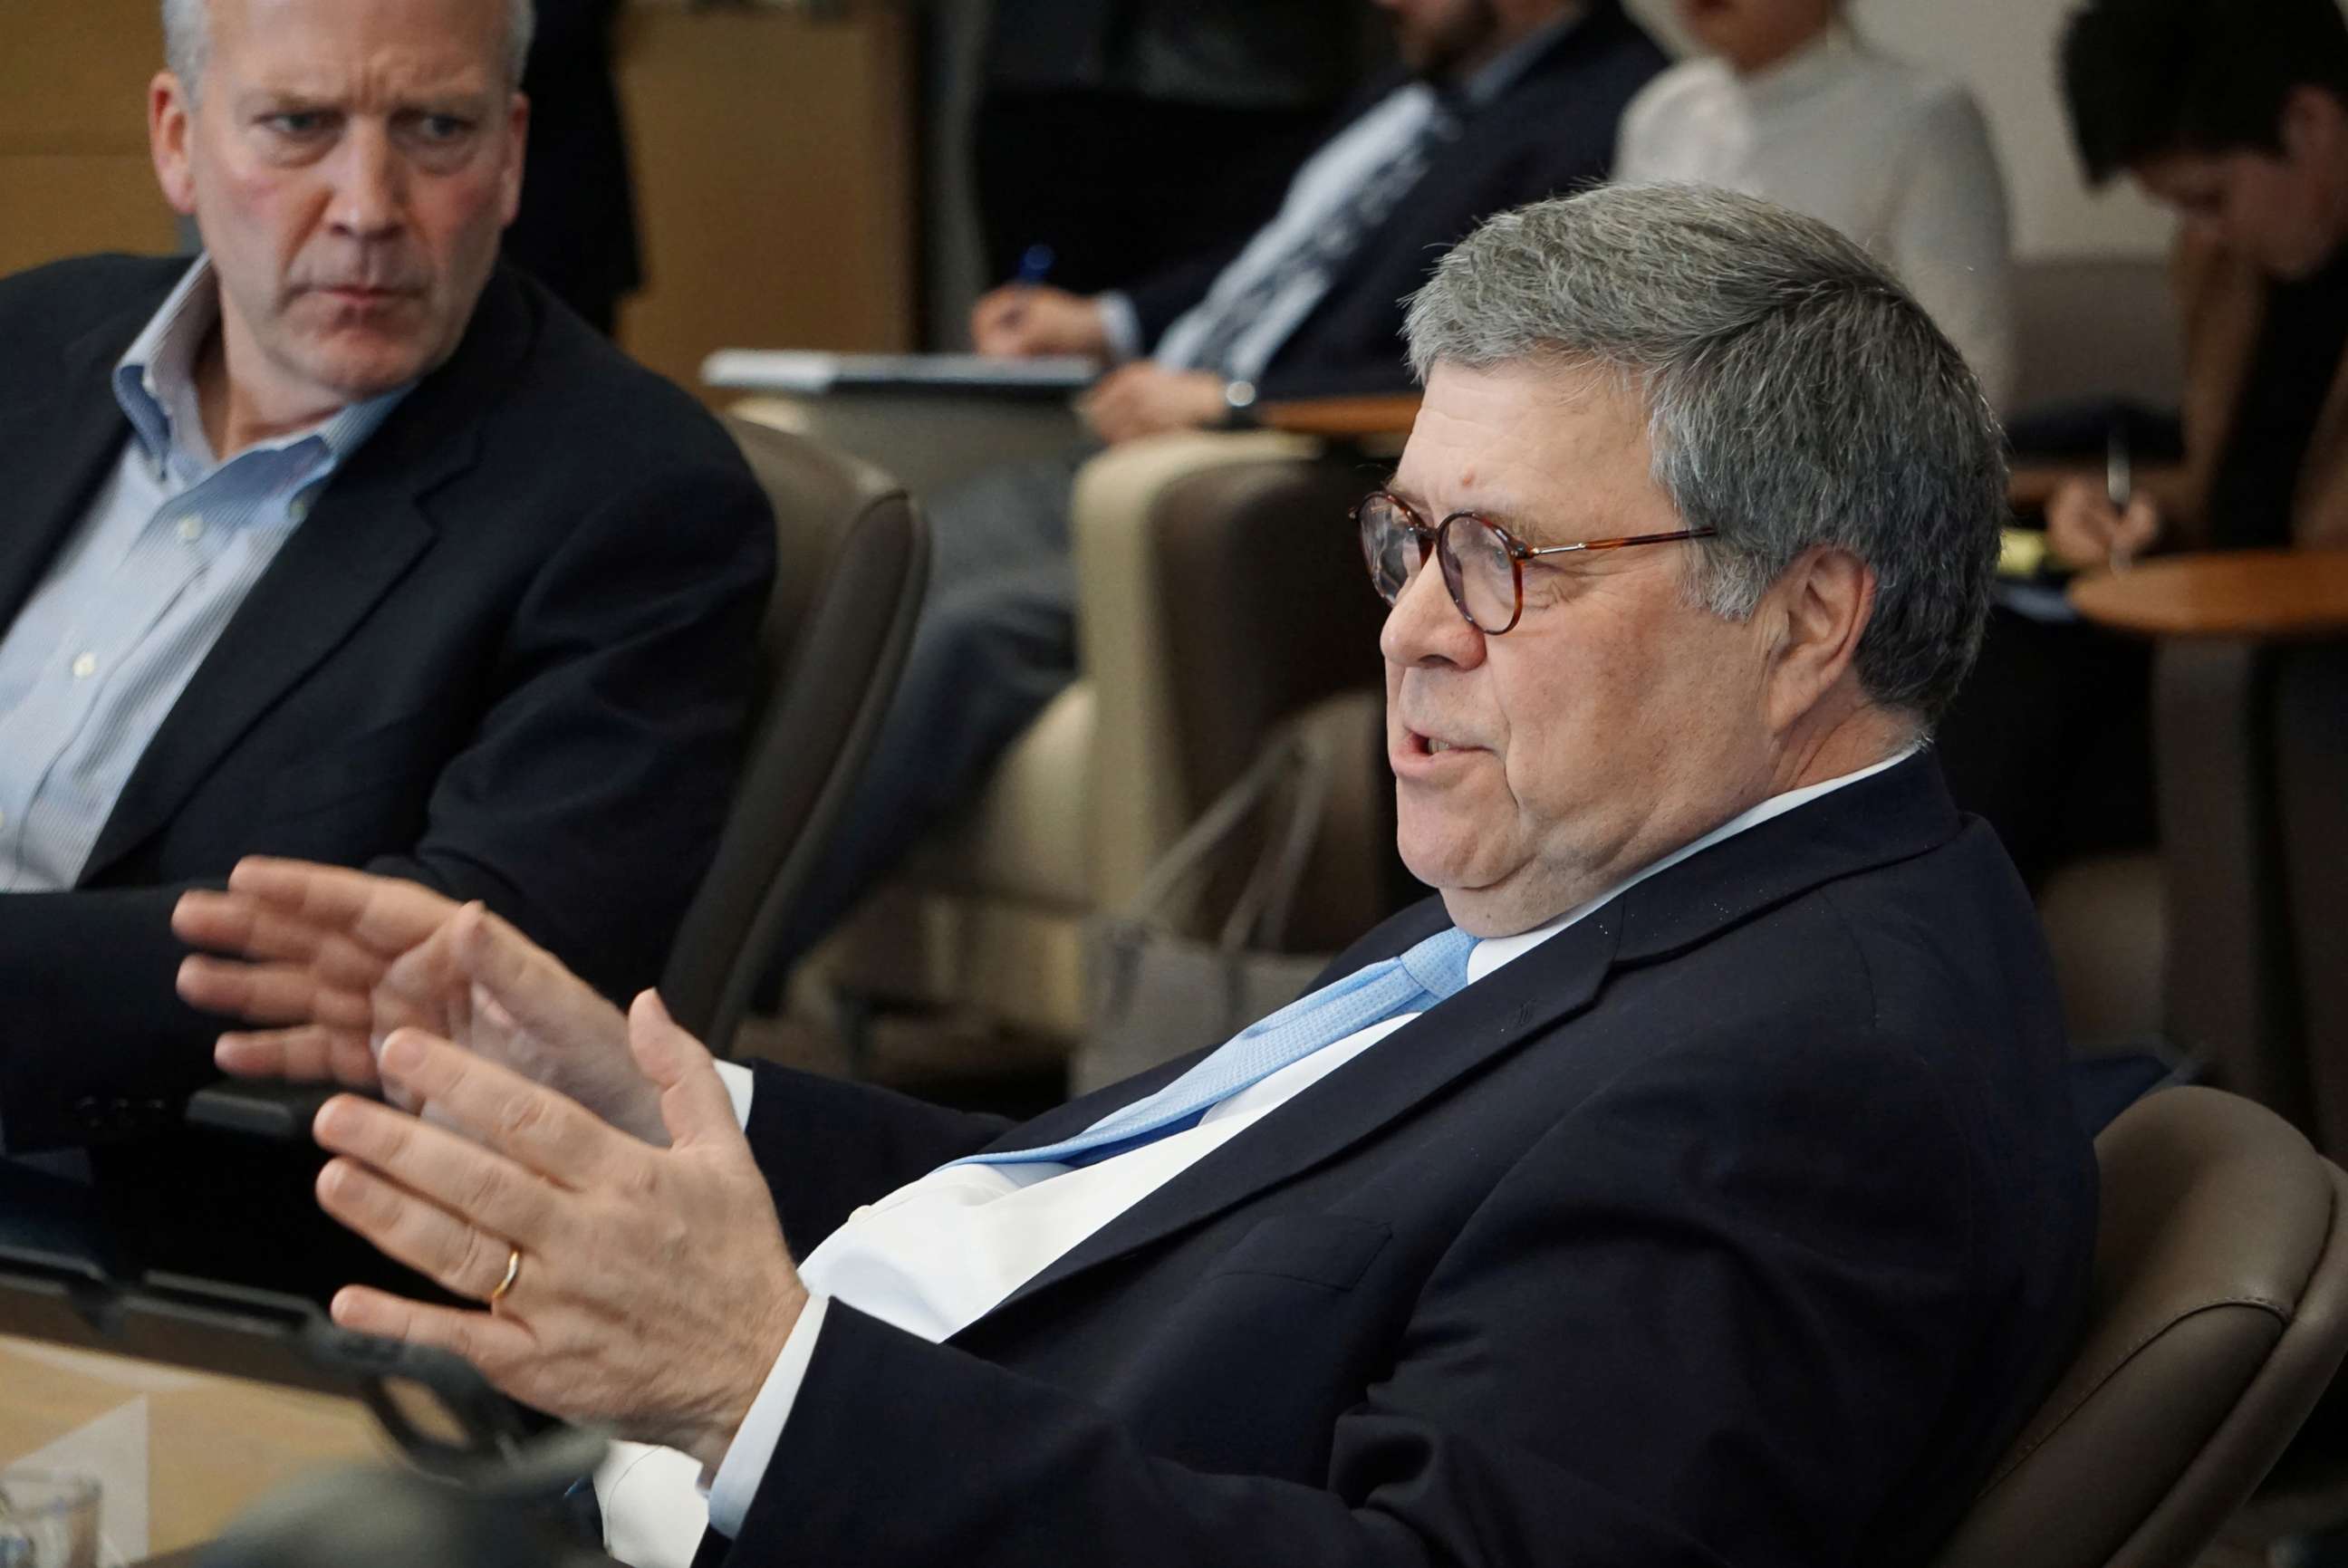 PHOTO:Attorney General William Barr speaks during a Department of Justice roundtable with Alaska native leaders in Anchorage, Alaska, May 29, 2019.